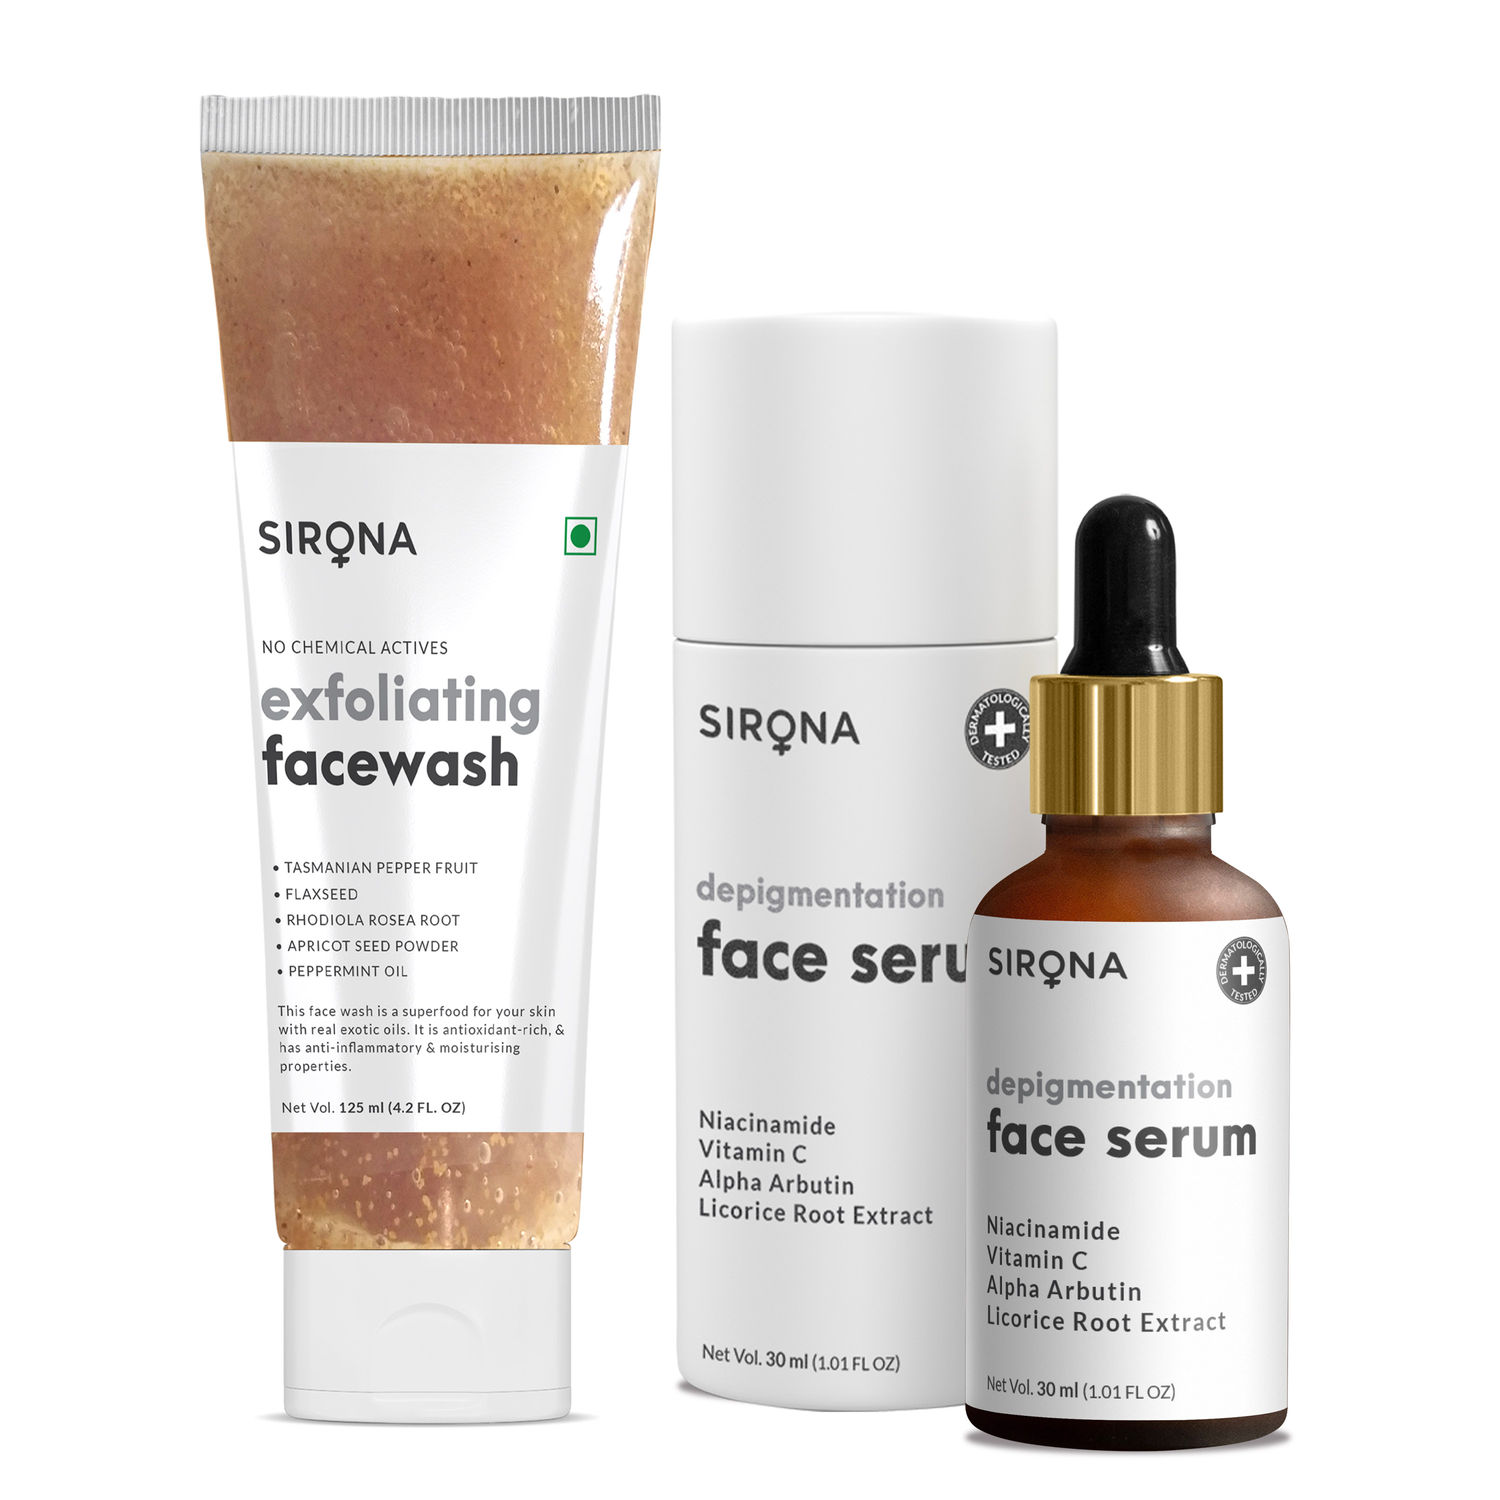 Buy Sirona Exfoliating Face Wash with Depigmentation Face Serum - Purplle